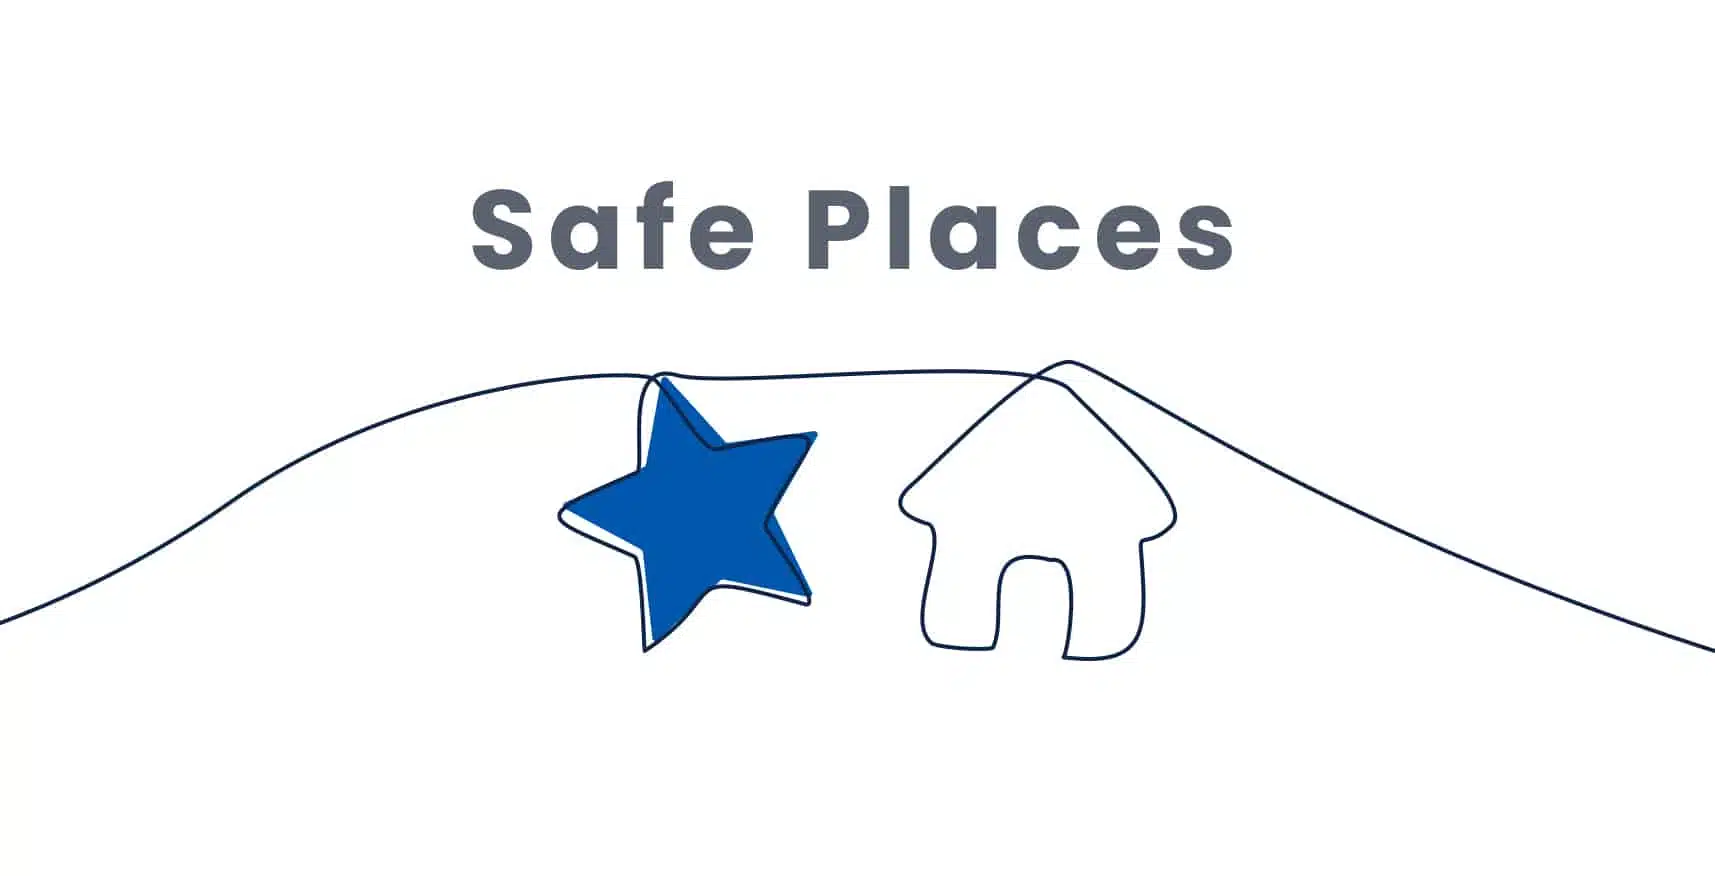 A blue star and an outline of a house are connected by a continuous line with the text "Safe Places" above them.